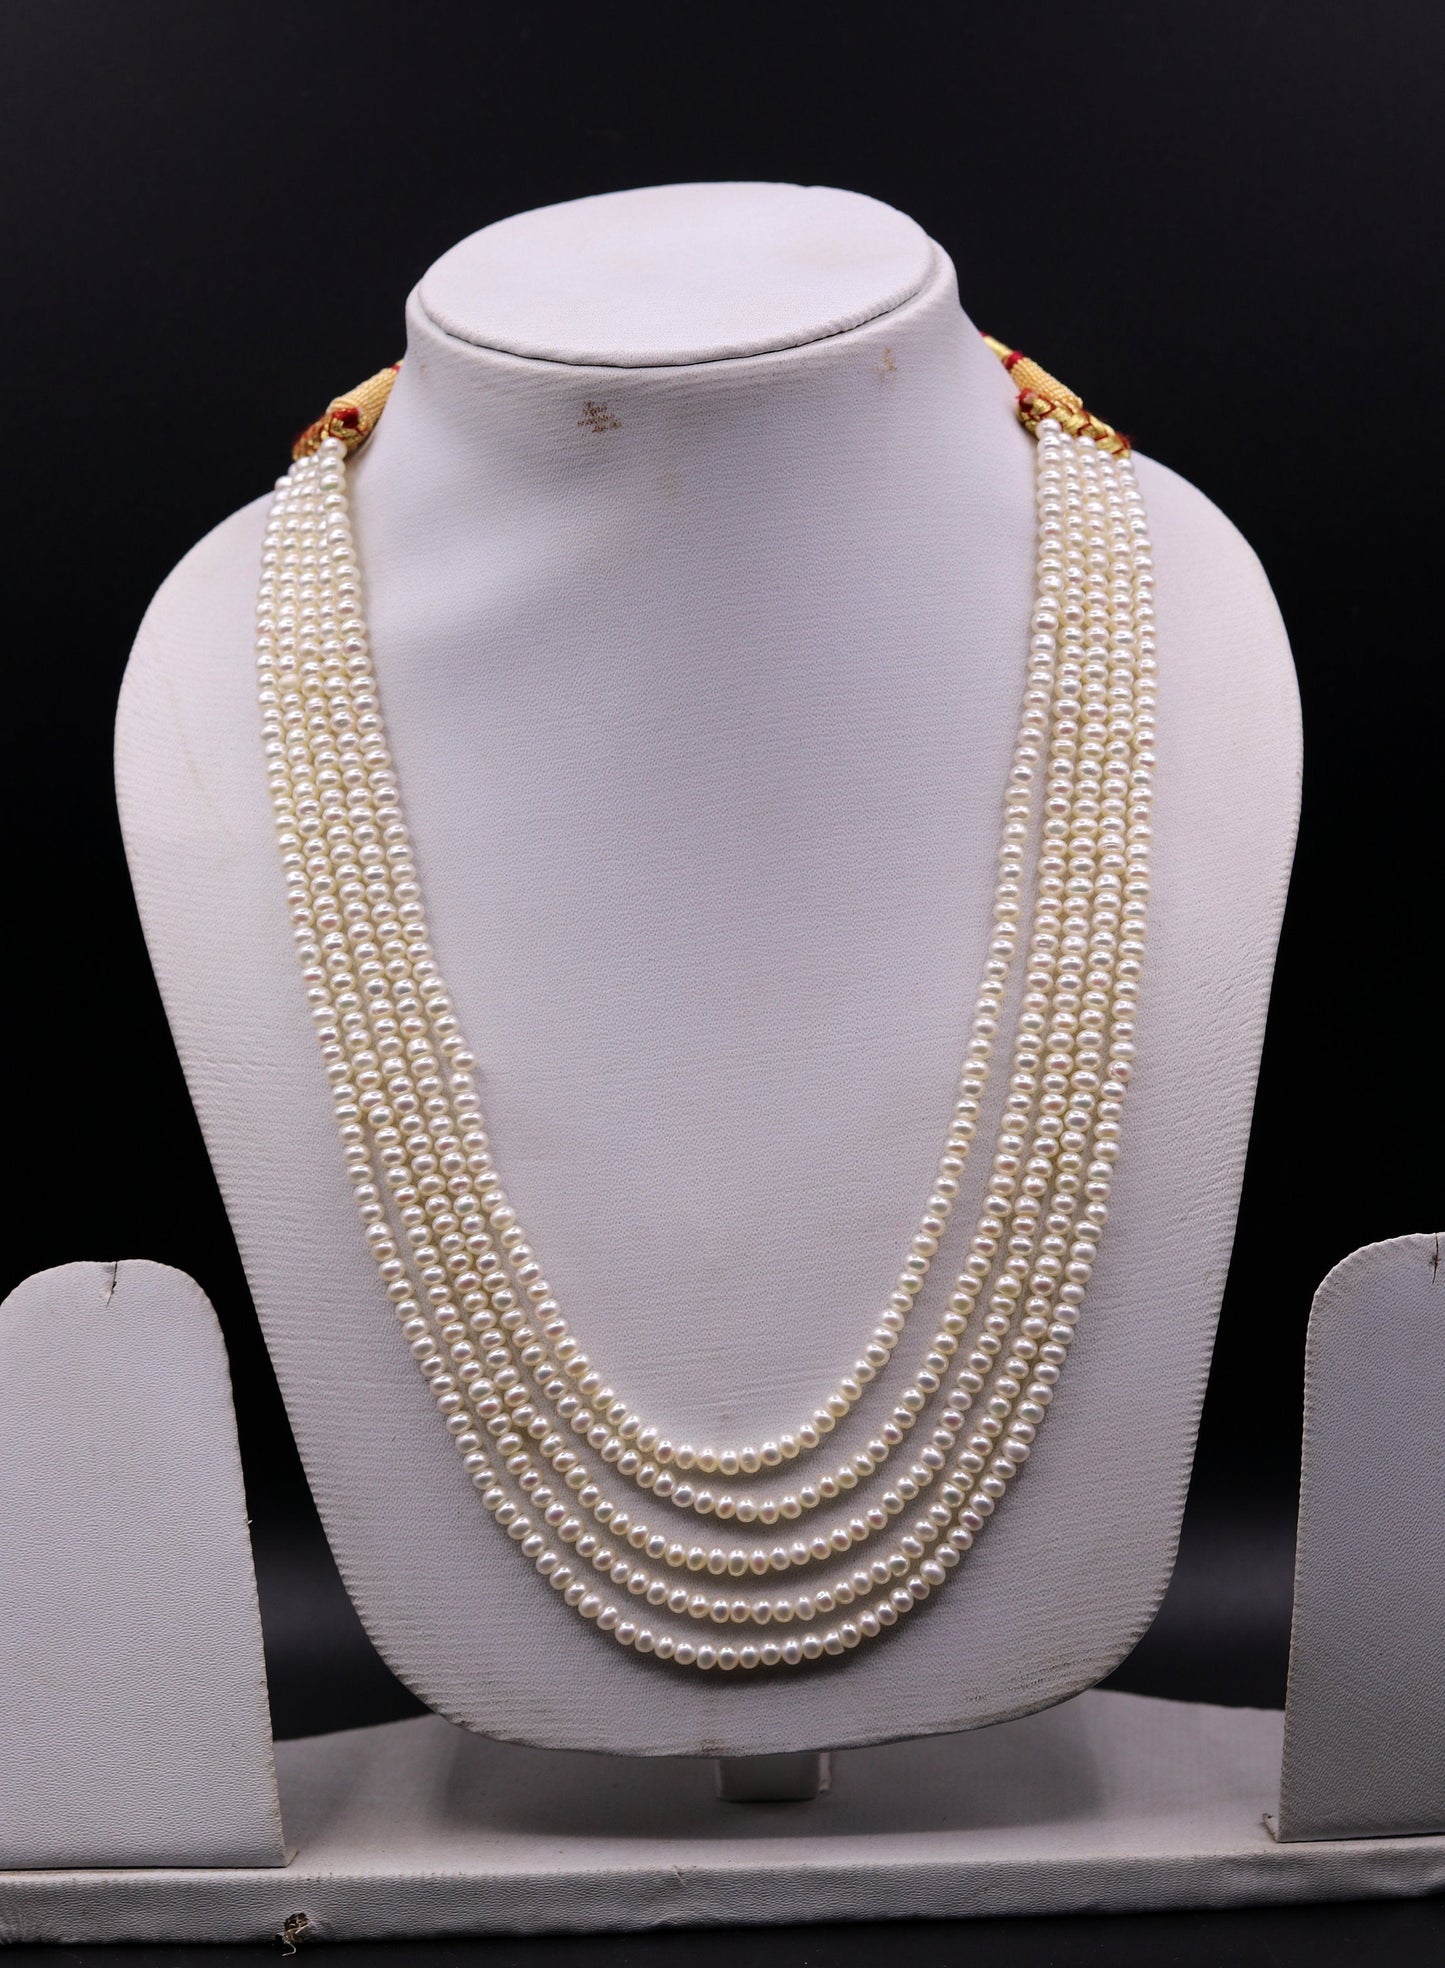 Natural real pearl five line layer string necklace set gorgeous wedding or daily use necklace jewelry from india belly dance set34 - TRIBAL ORNAMENTS